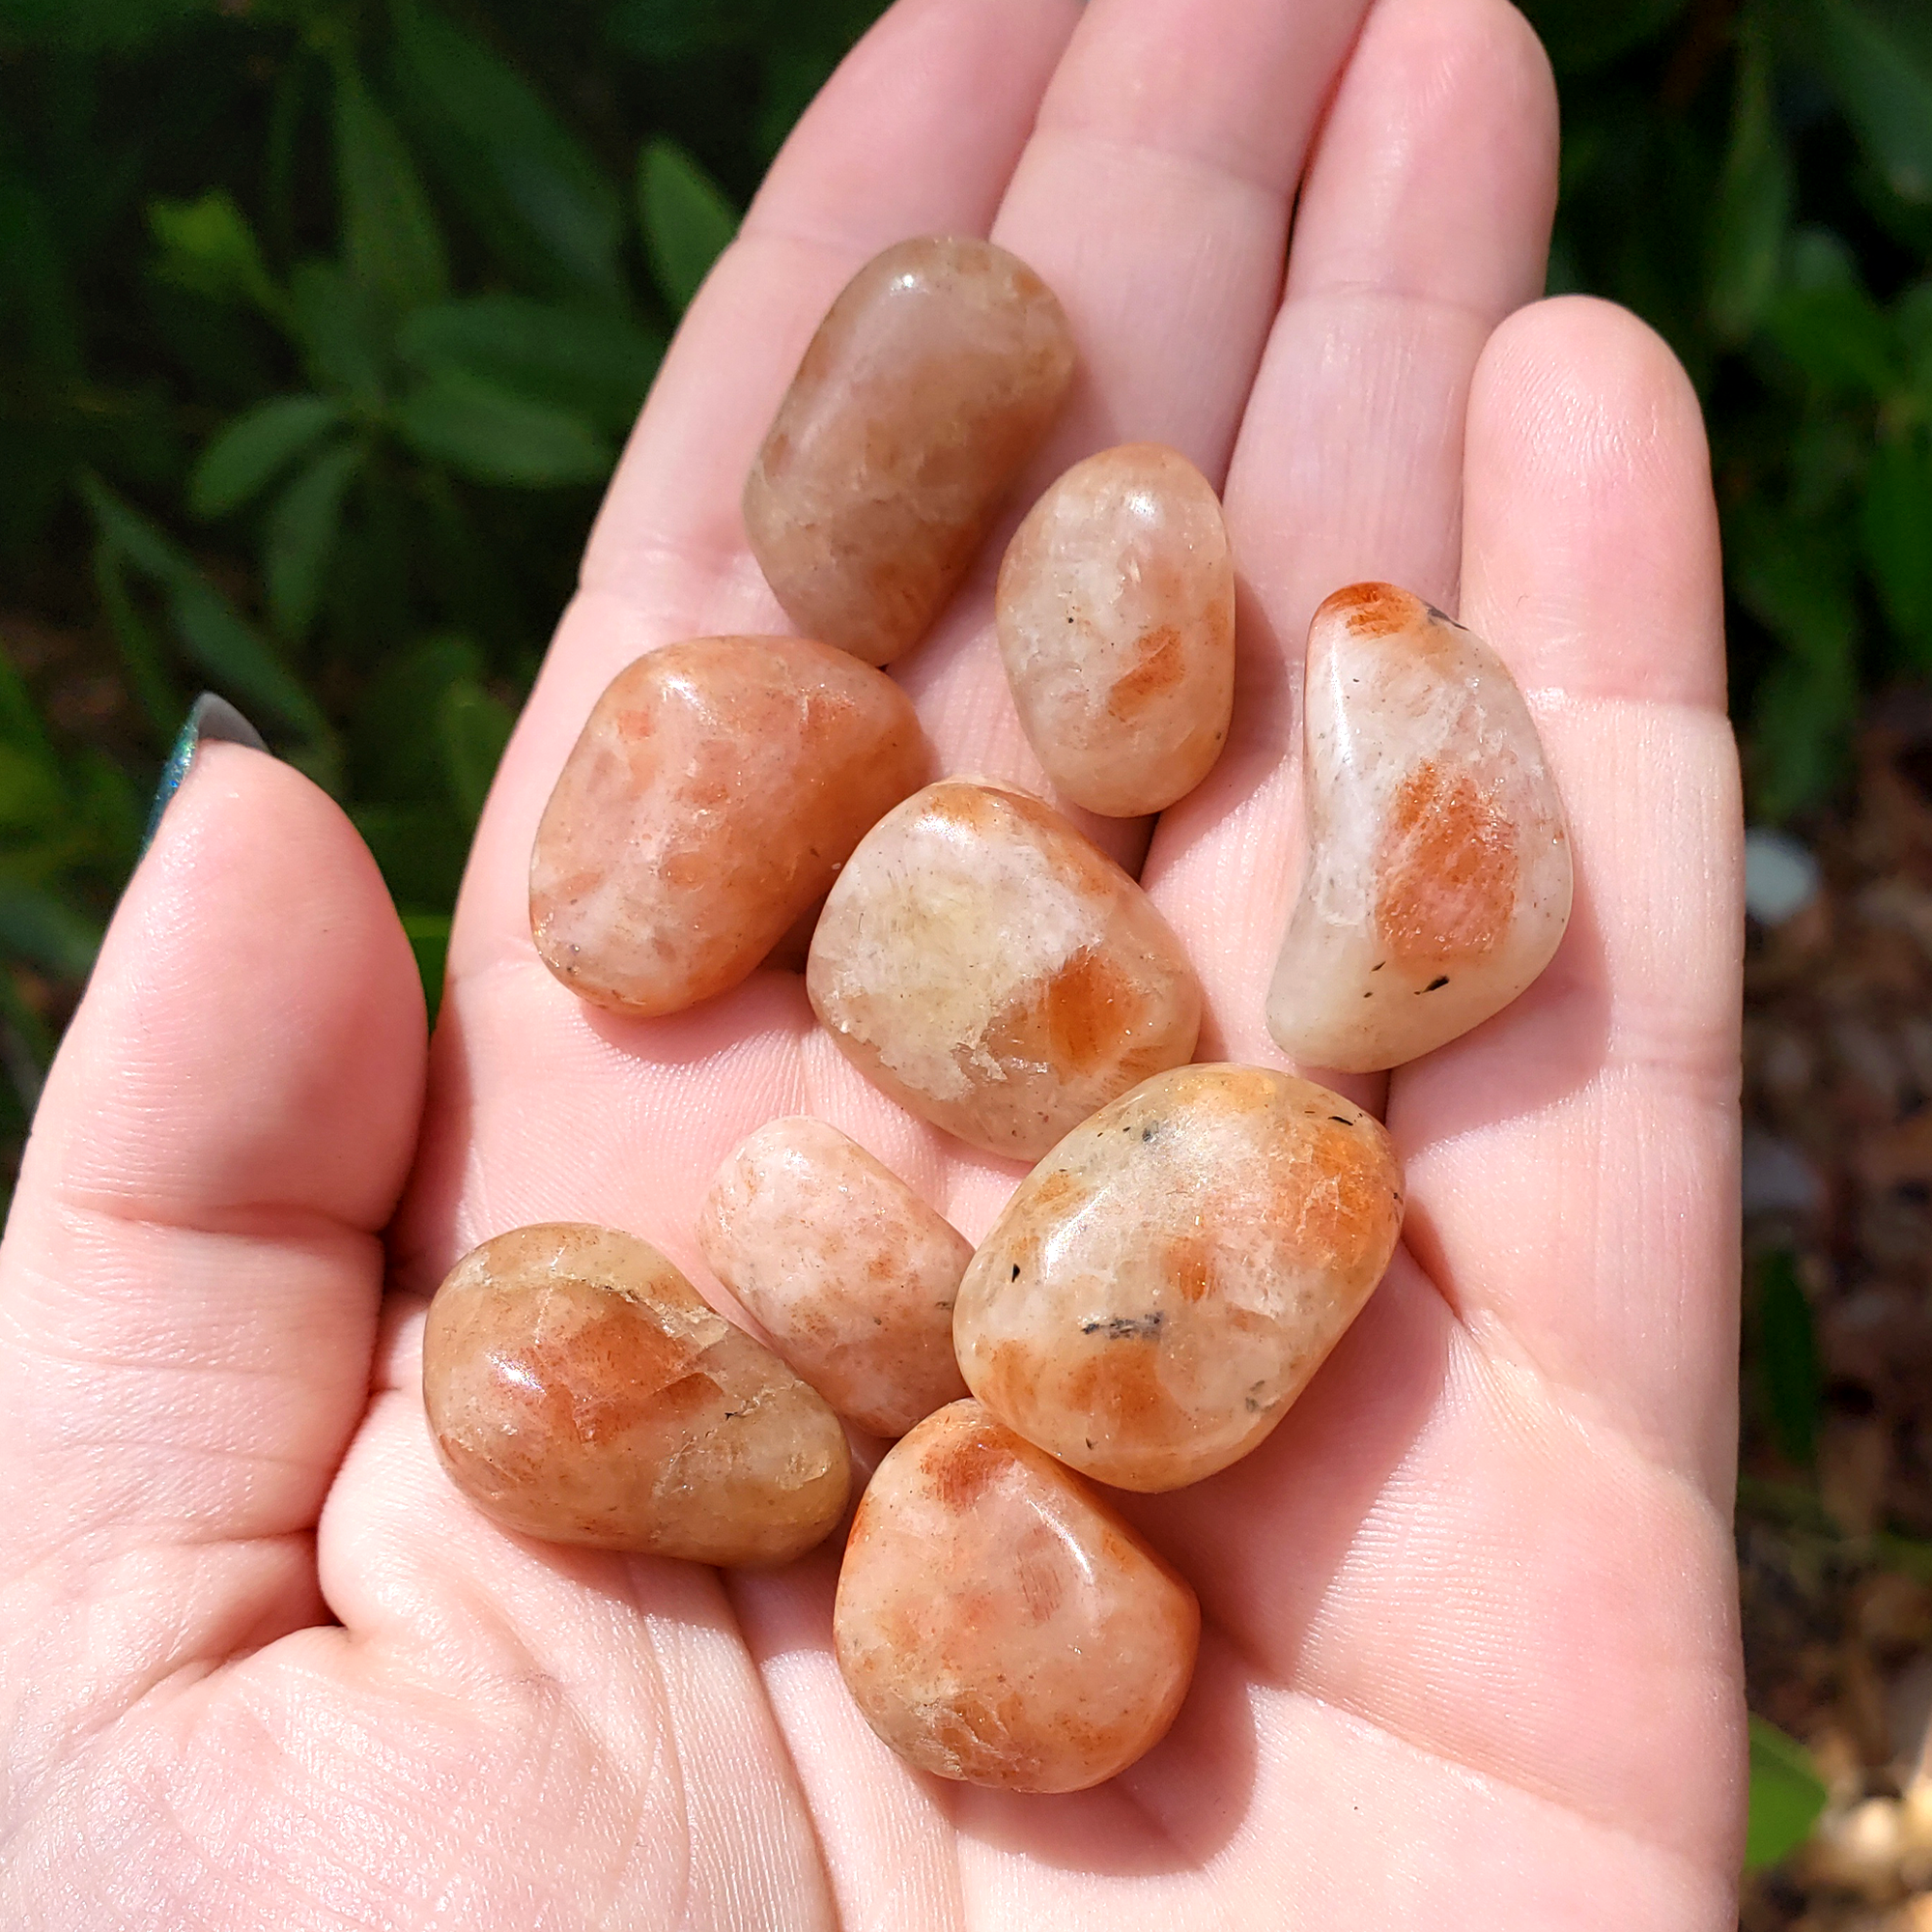 Sunstone Natural Tumbled Stone - Small One Stone - In Sunlight